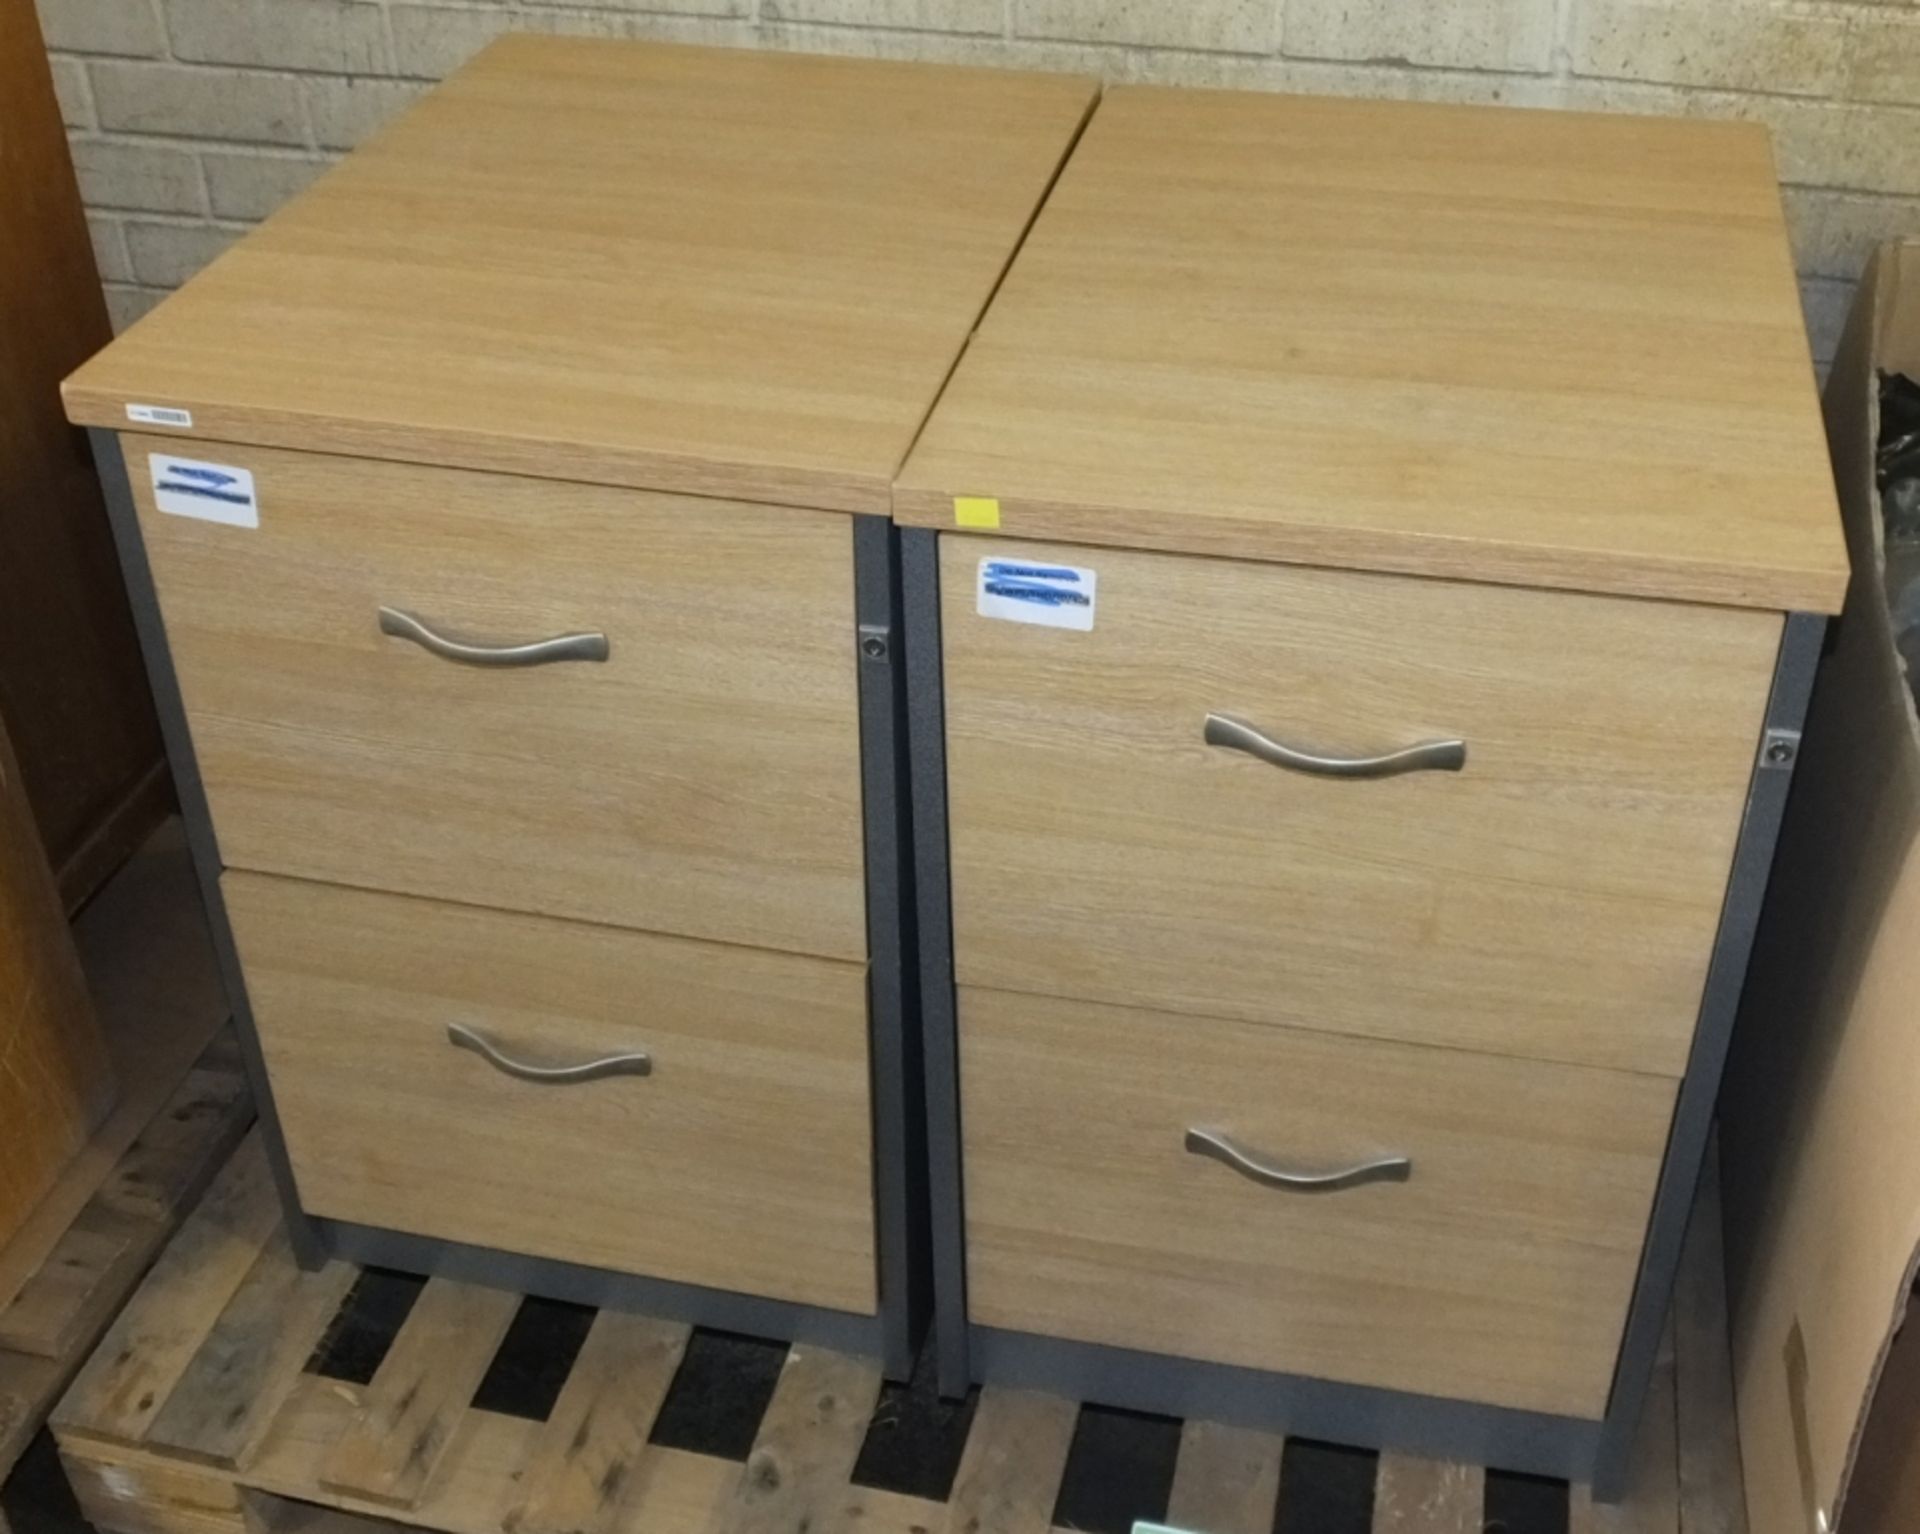 2x 2 drawer filing cabinets - wooden